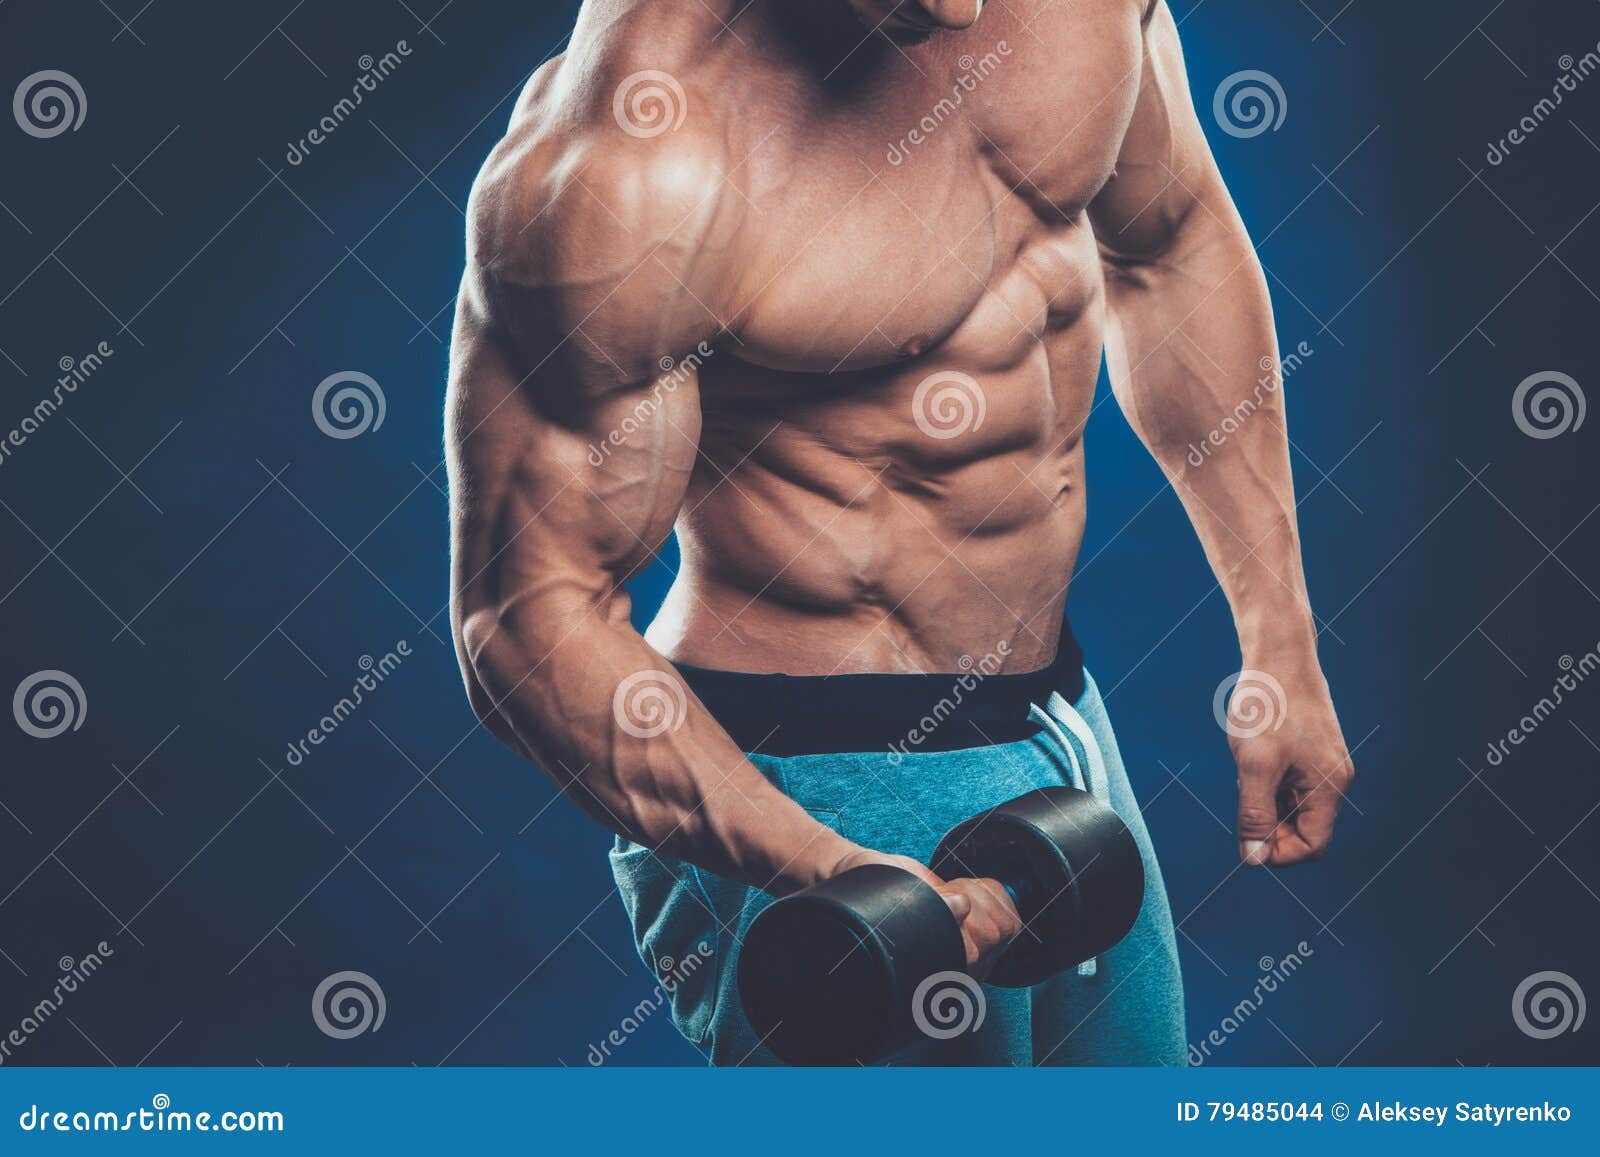 Athletic Man Showing Muscular Body And Doing Exercises 